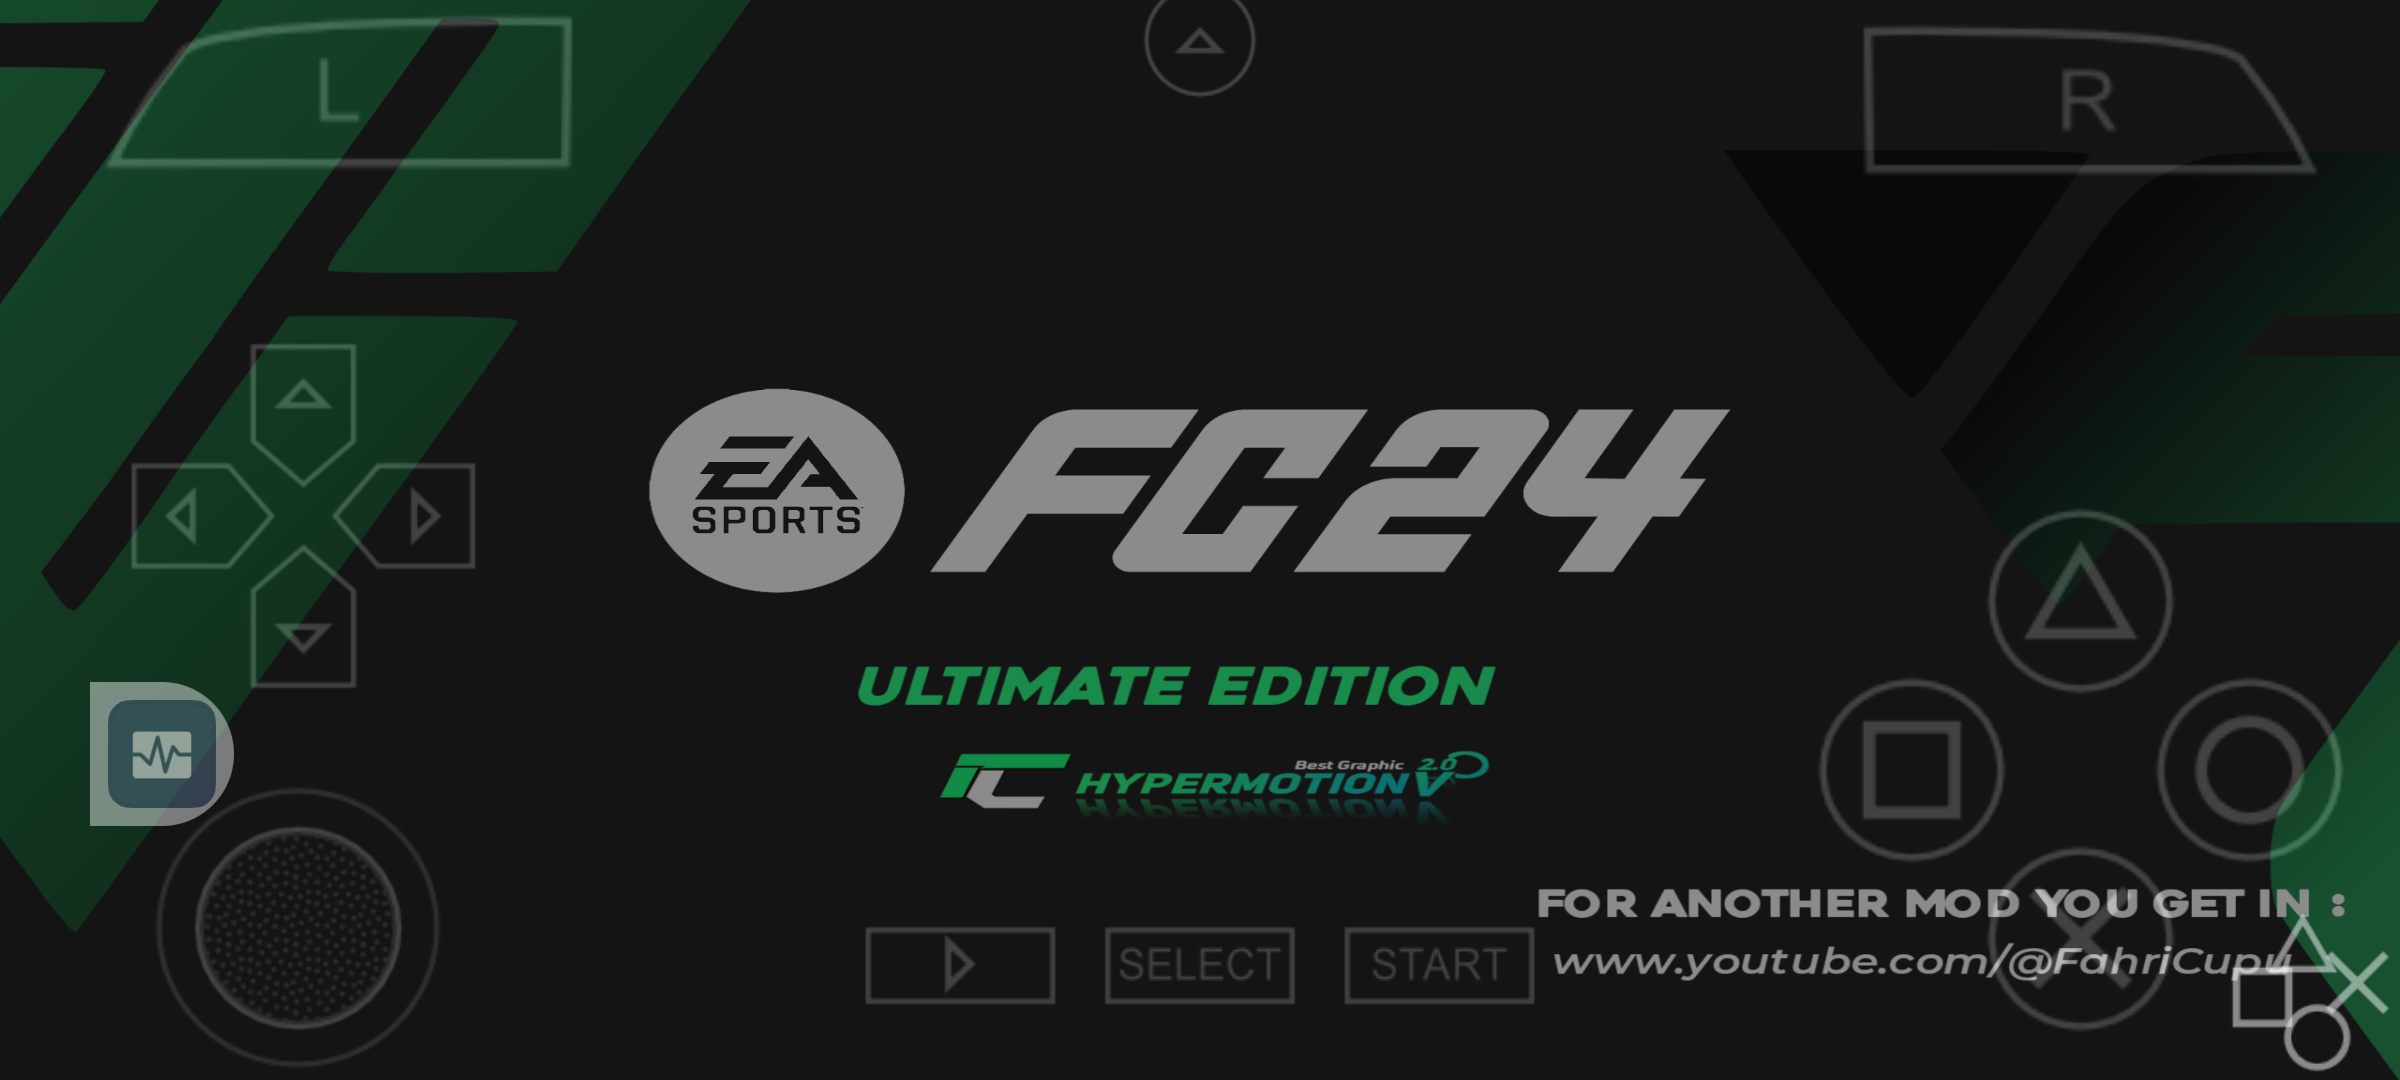 EA SPORTS FC 24 PPSSPP